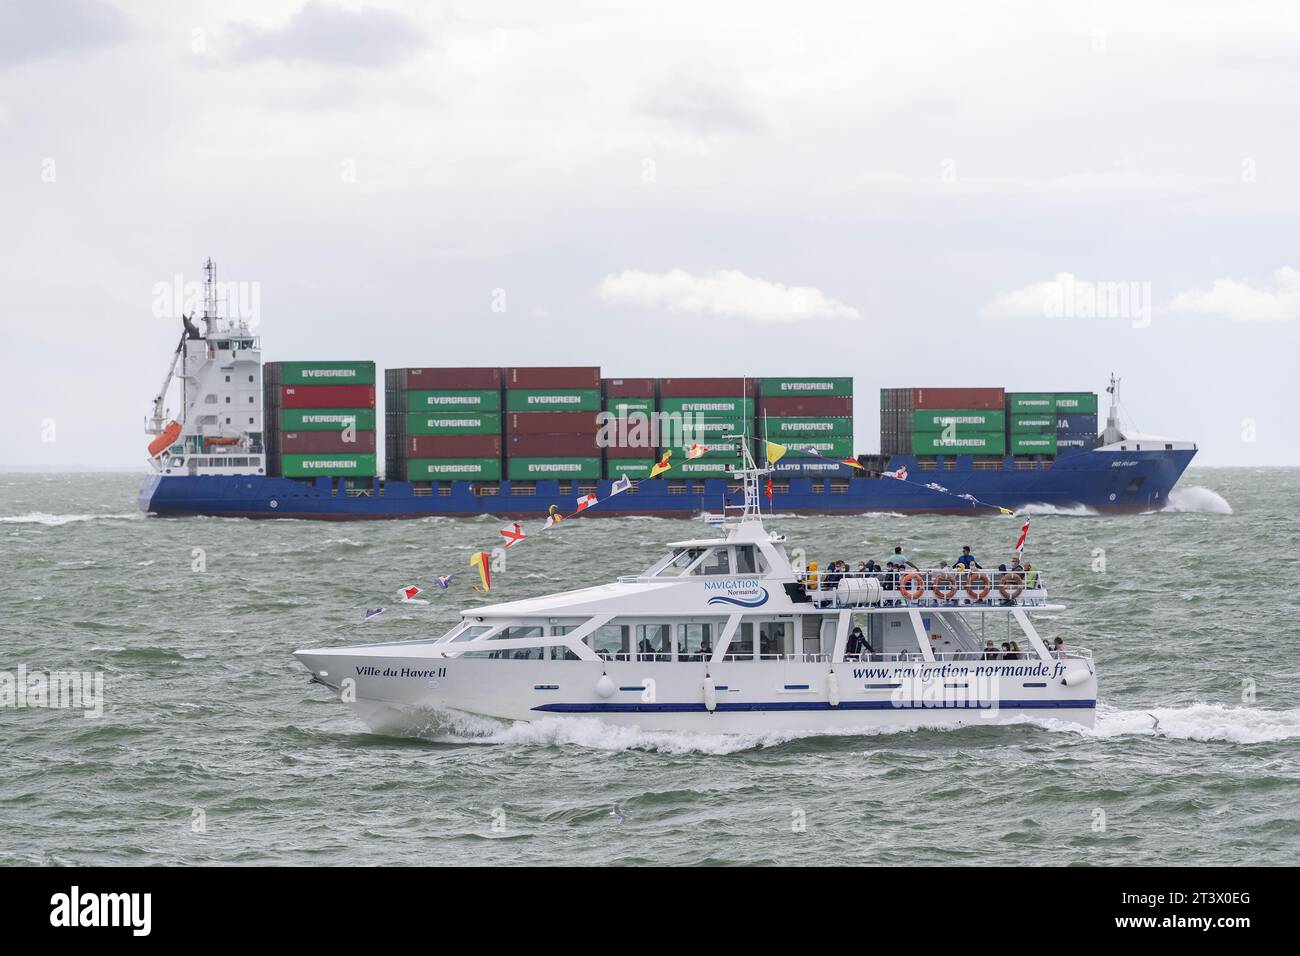 Le Havre, France - Passenger ship VILLEDUHAVRE II crosses in front of a container ship in English Channel. Stock Photo